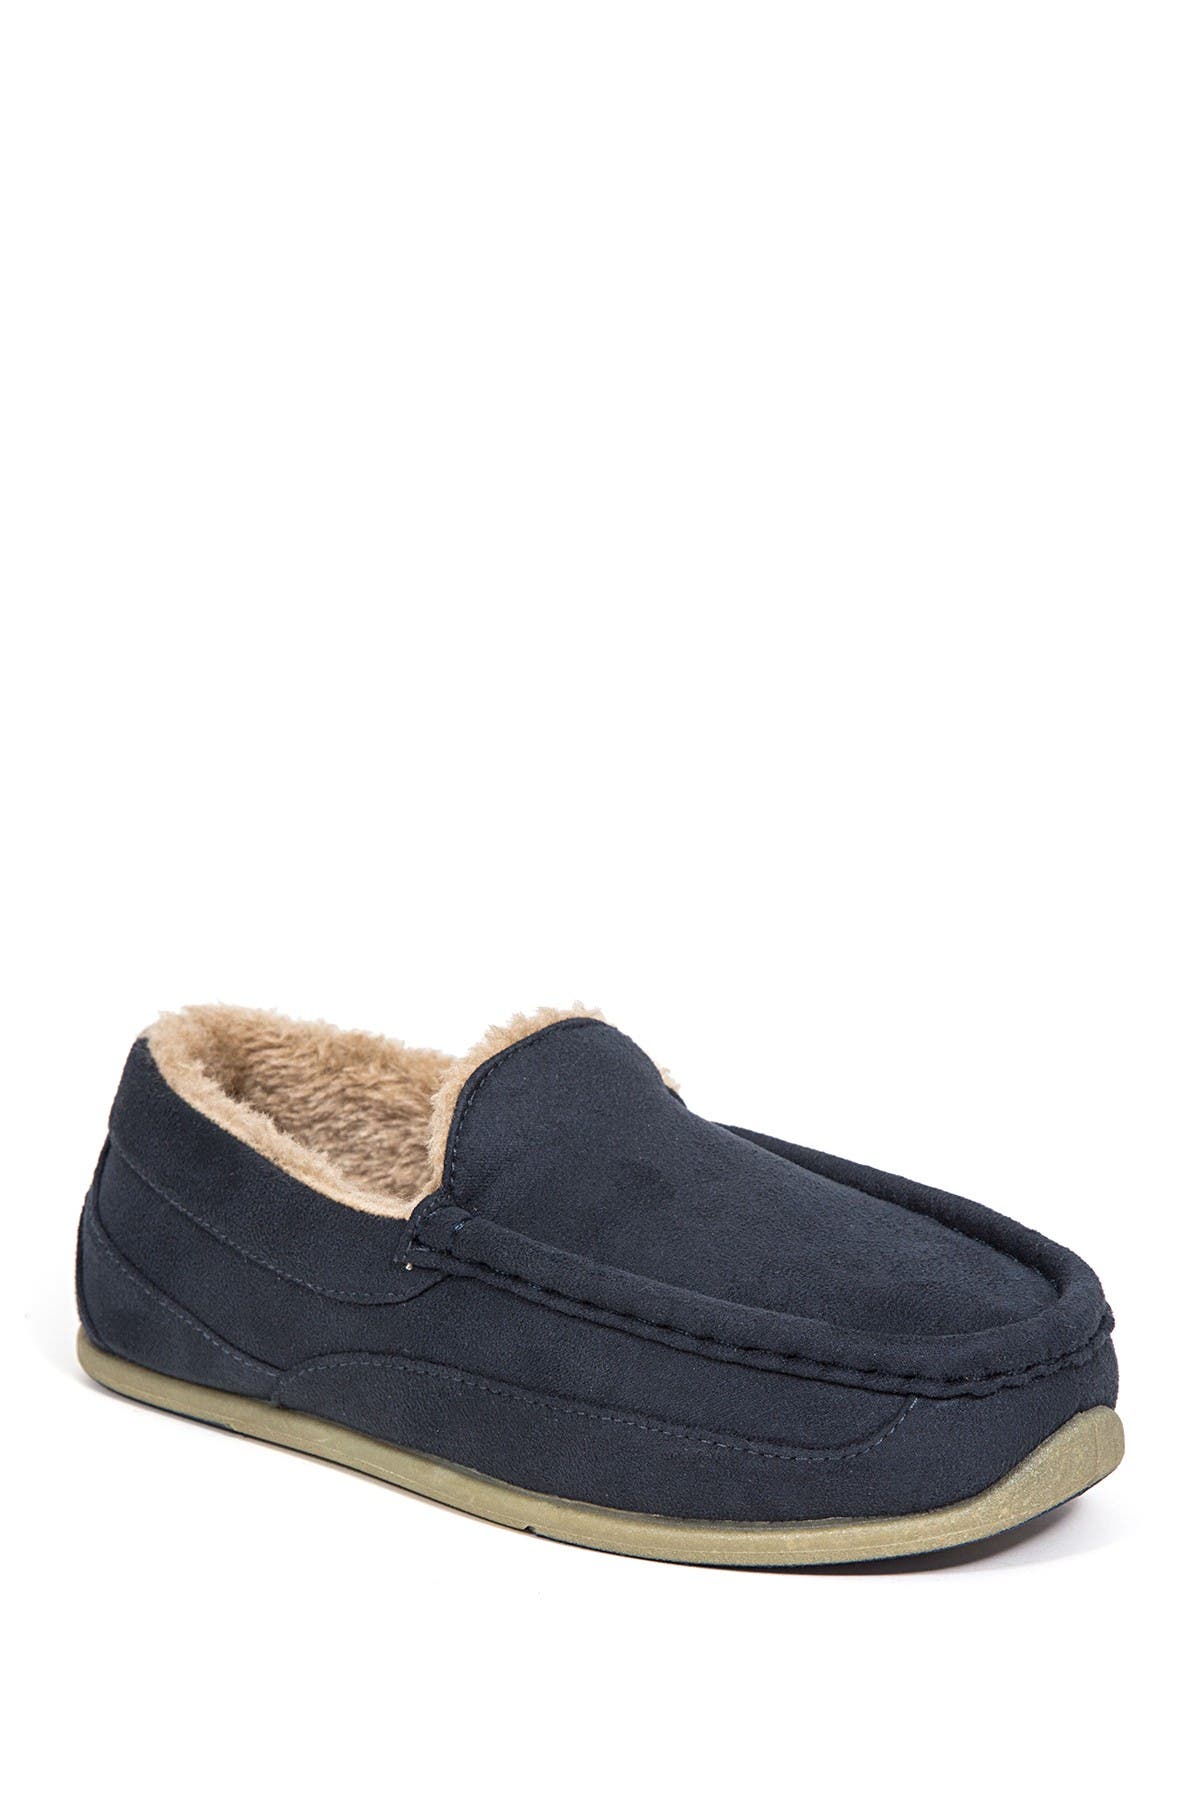 Slipperooz Lil' Nordic Faux Fur Lined 